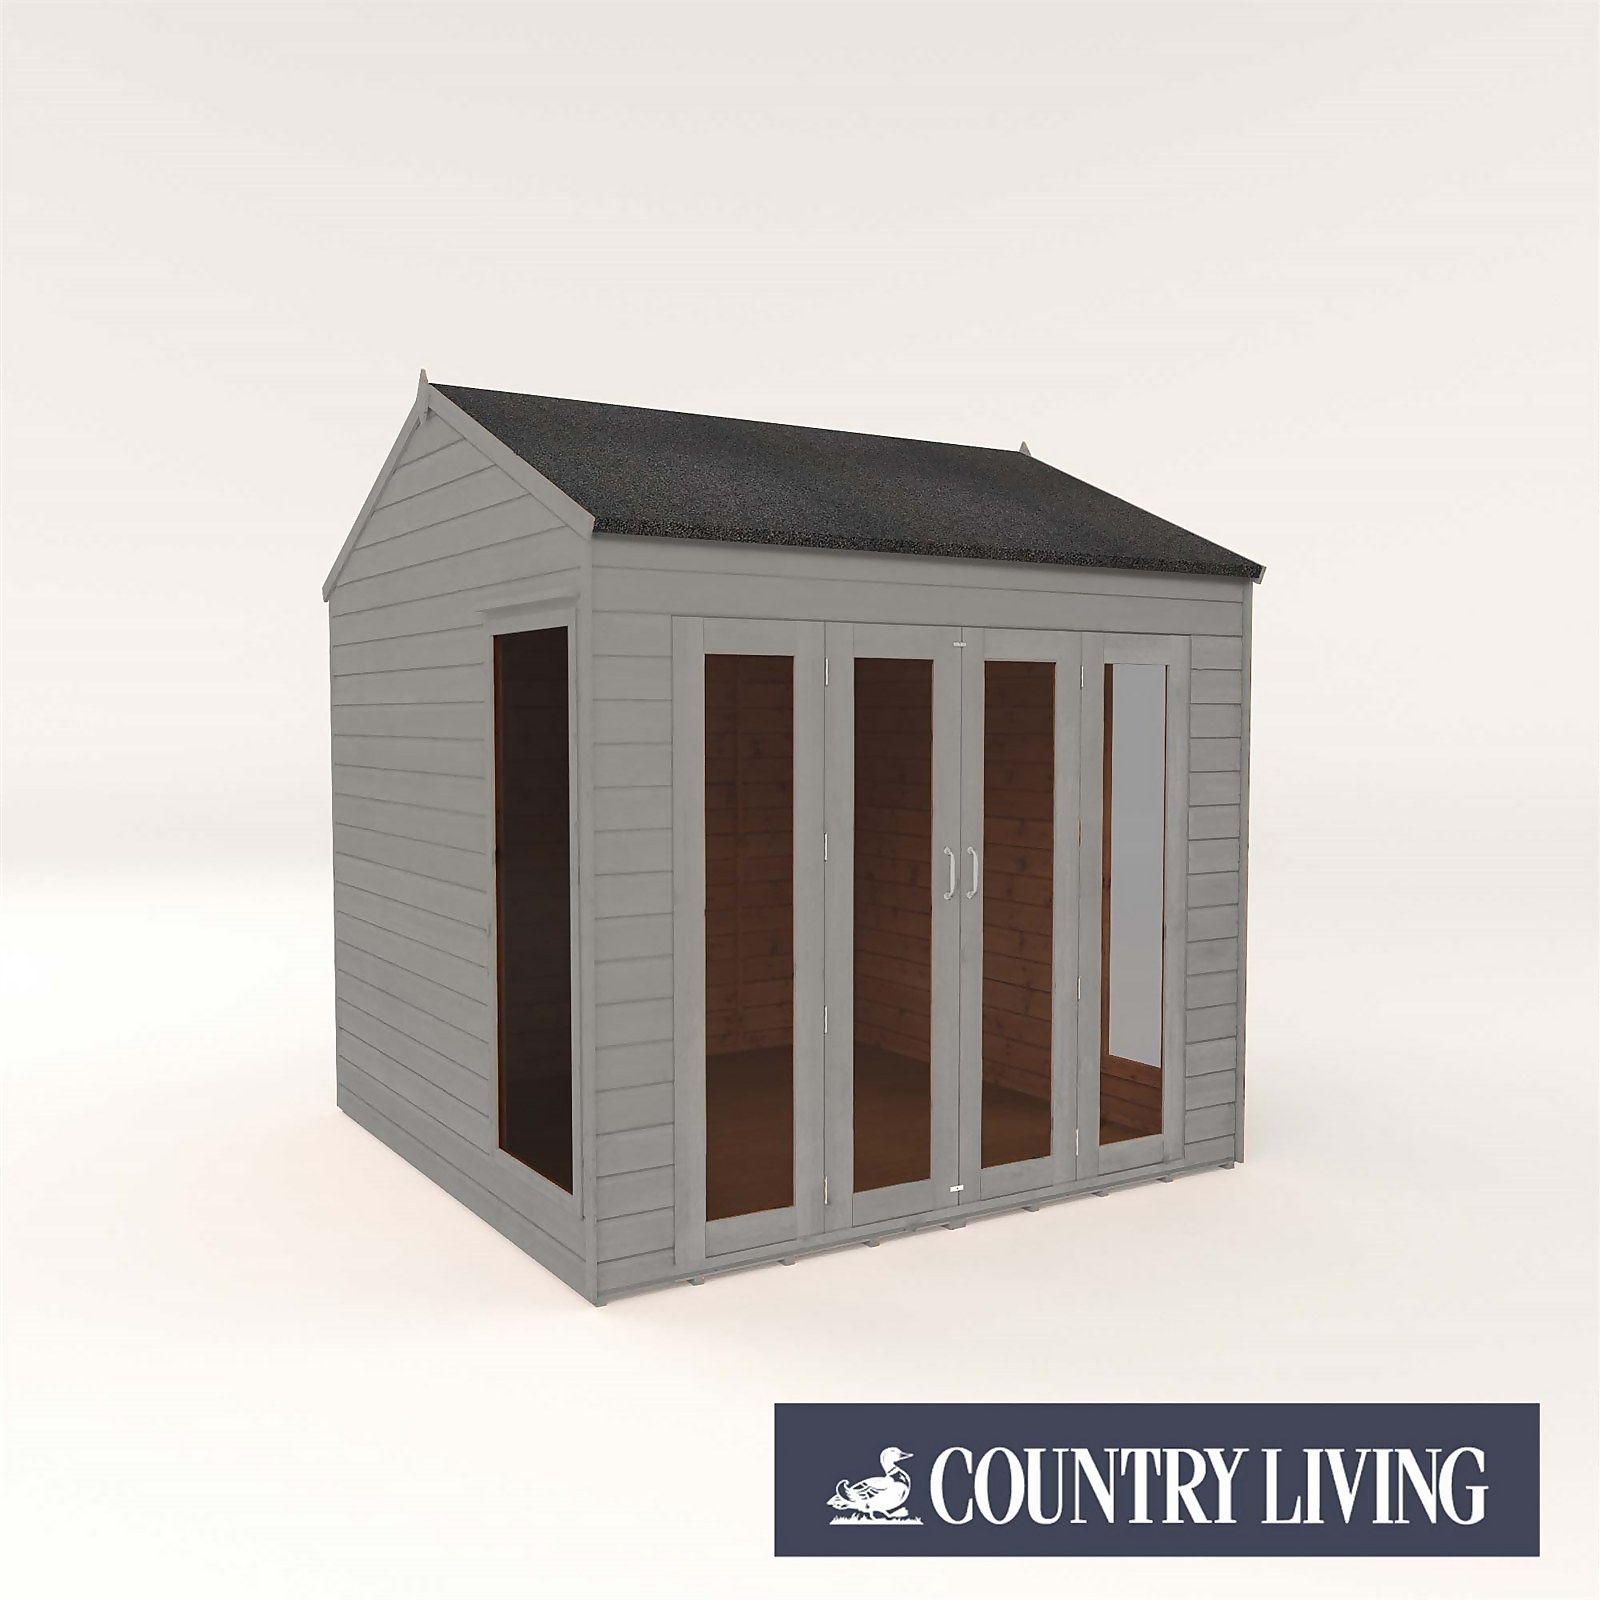 Photo of Country Living Hawksworth 8 X 8ft Summerhouse Painted + Installation - Thorpe Towers